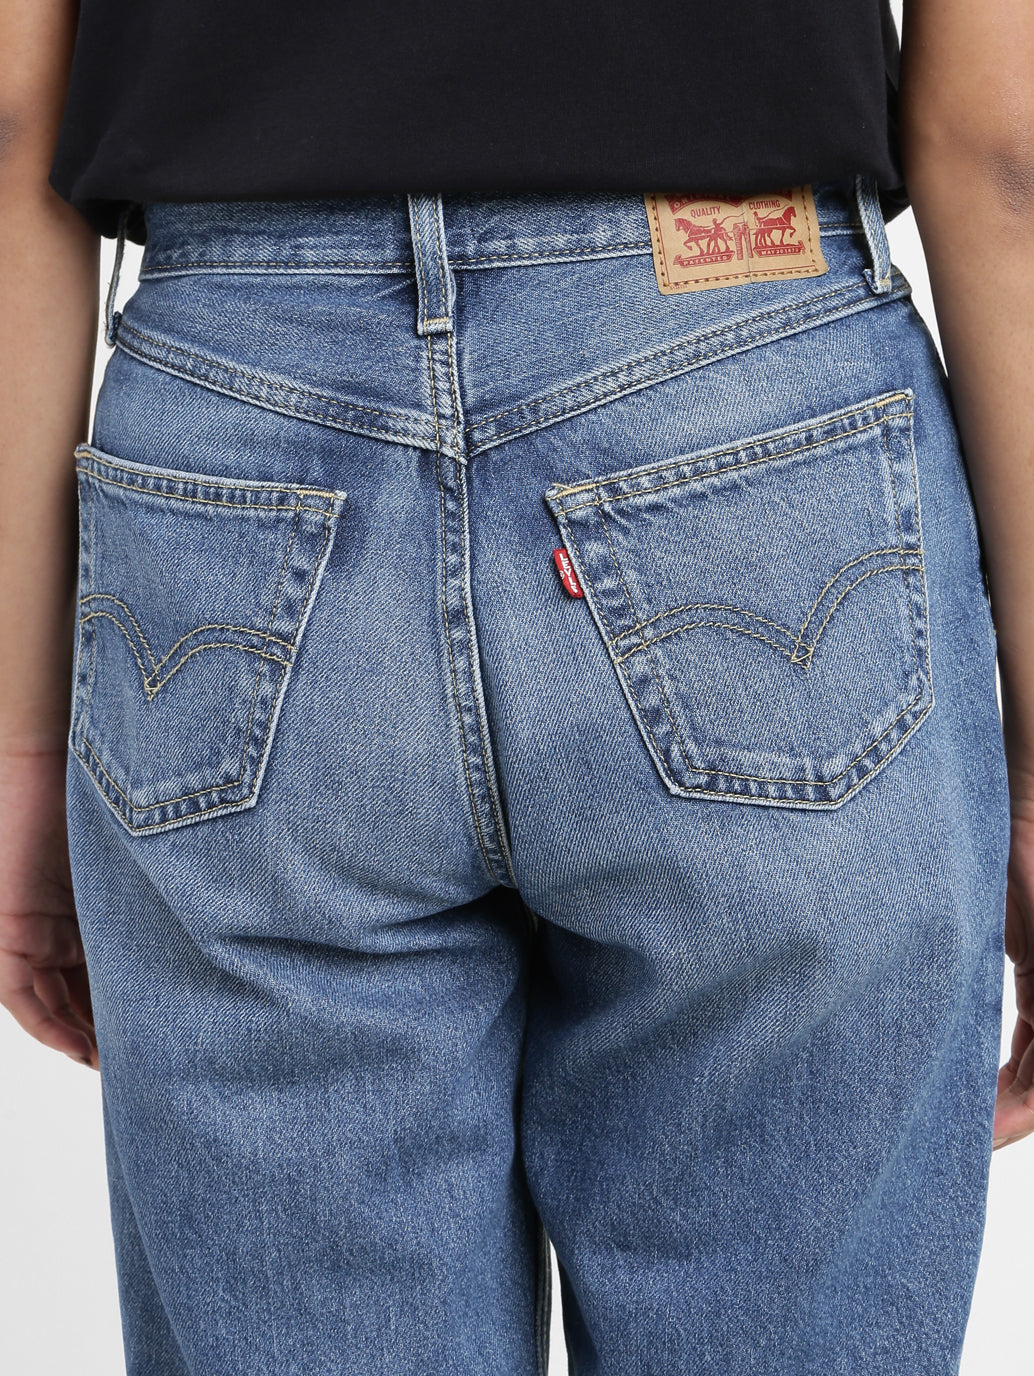 High Waisted Mom Jeans Levis Relaxed Fit Tapered Leg Medium Fade